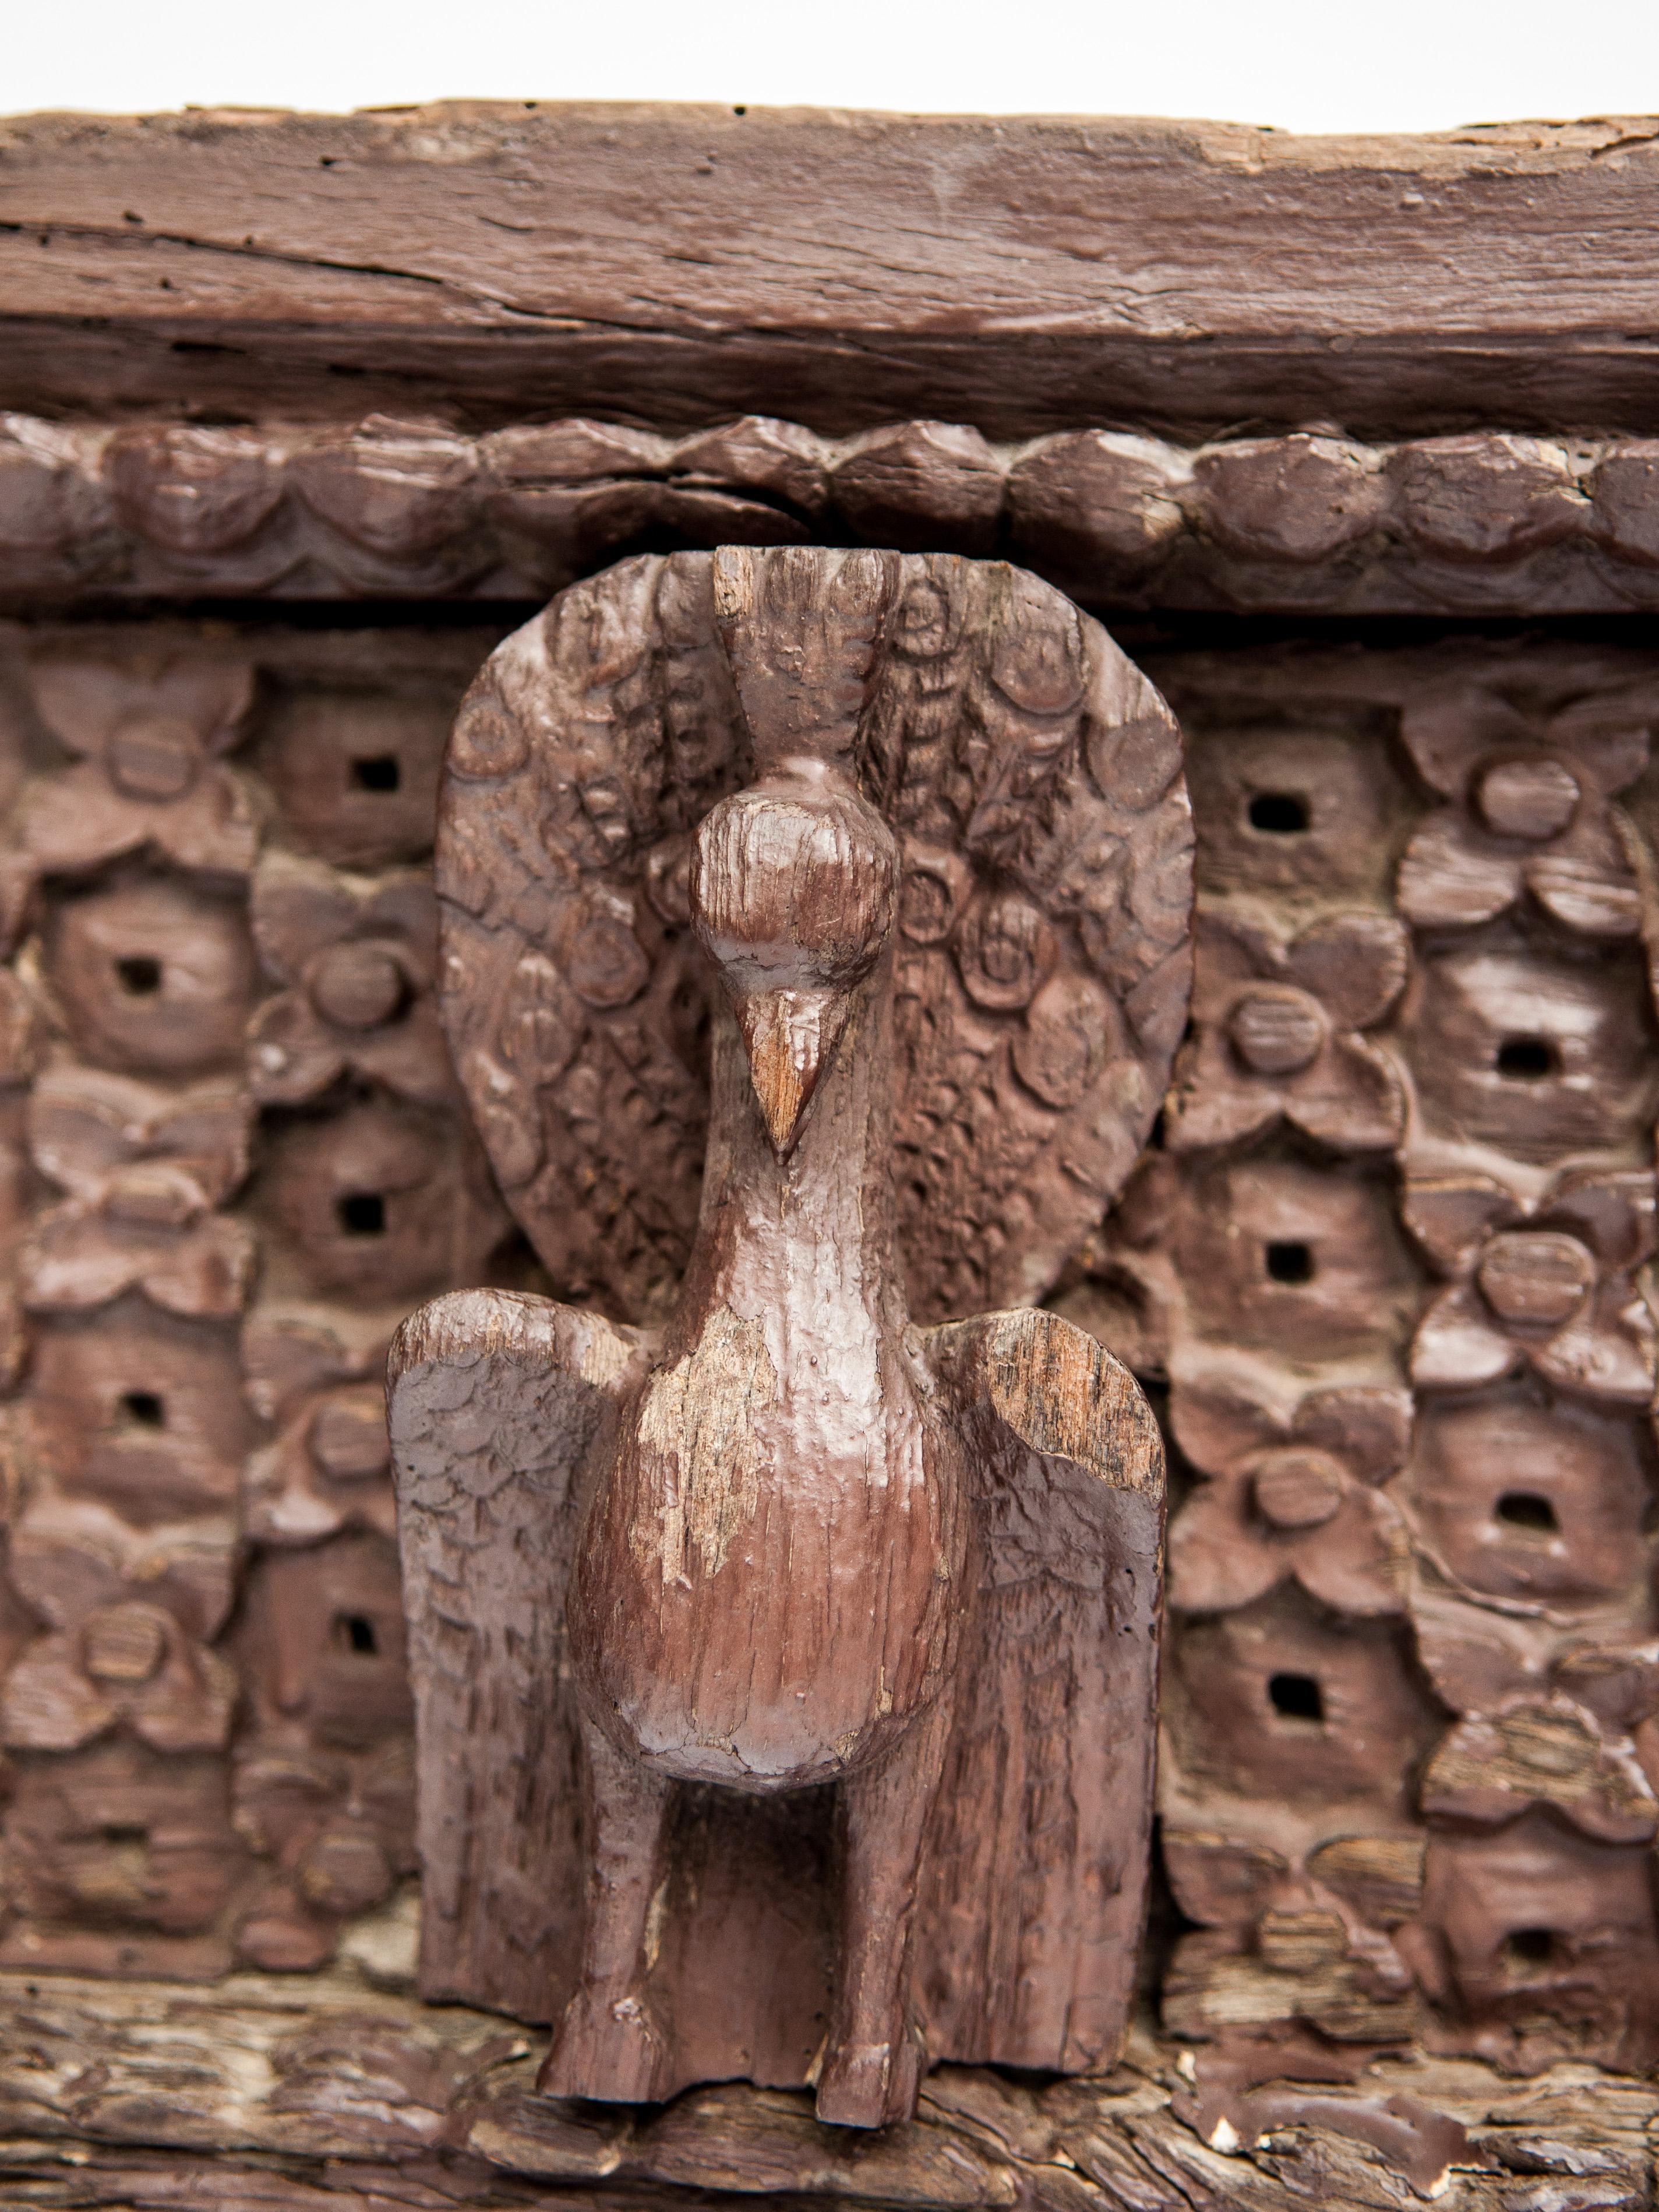 Wood Carved Architectural Panel with Bird Motif, Late 19th Century Newar of Nepal